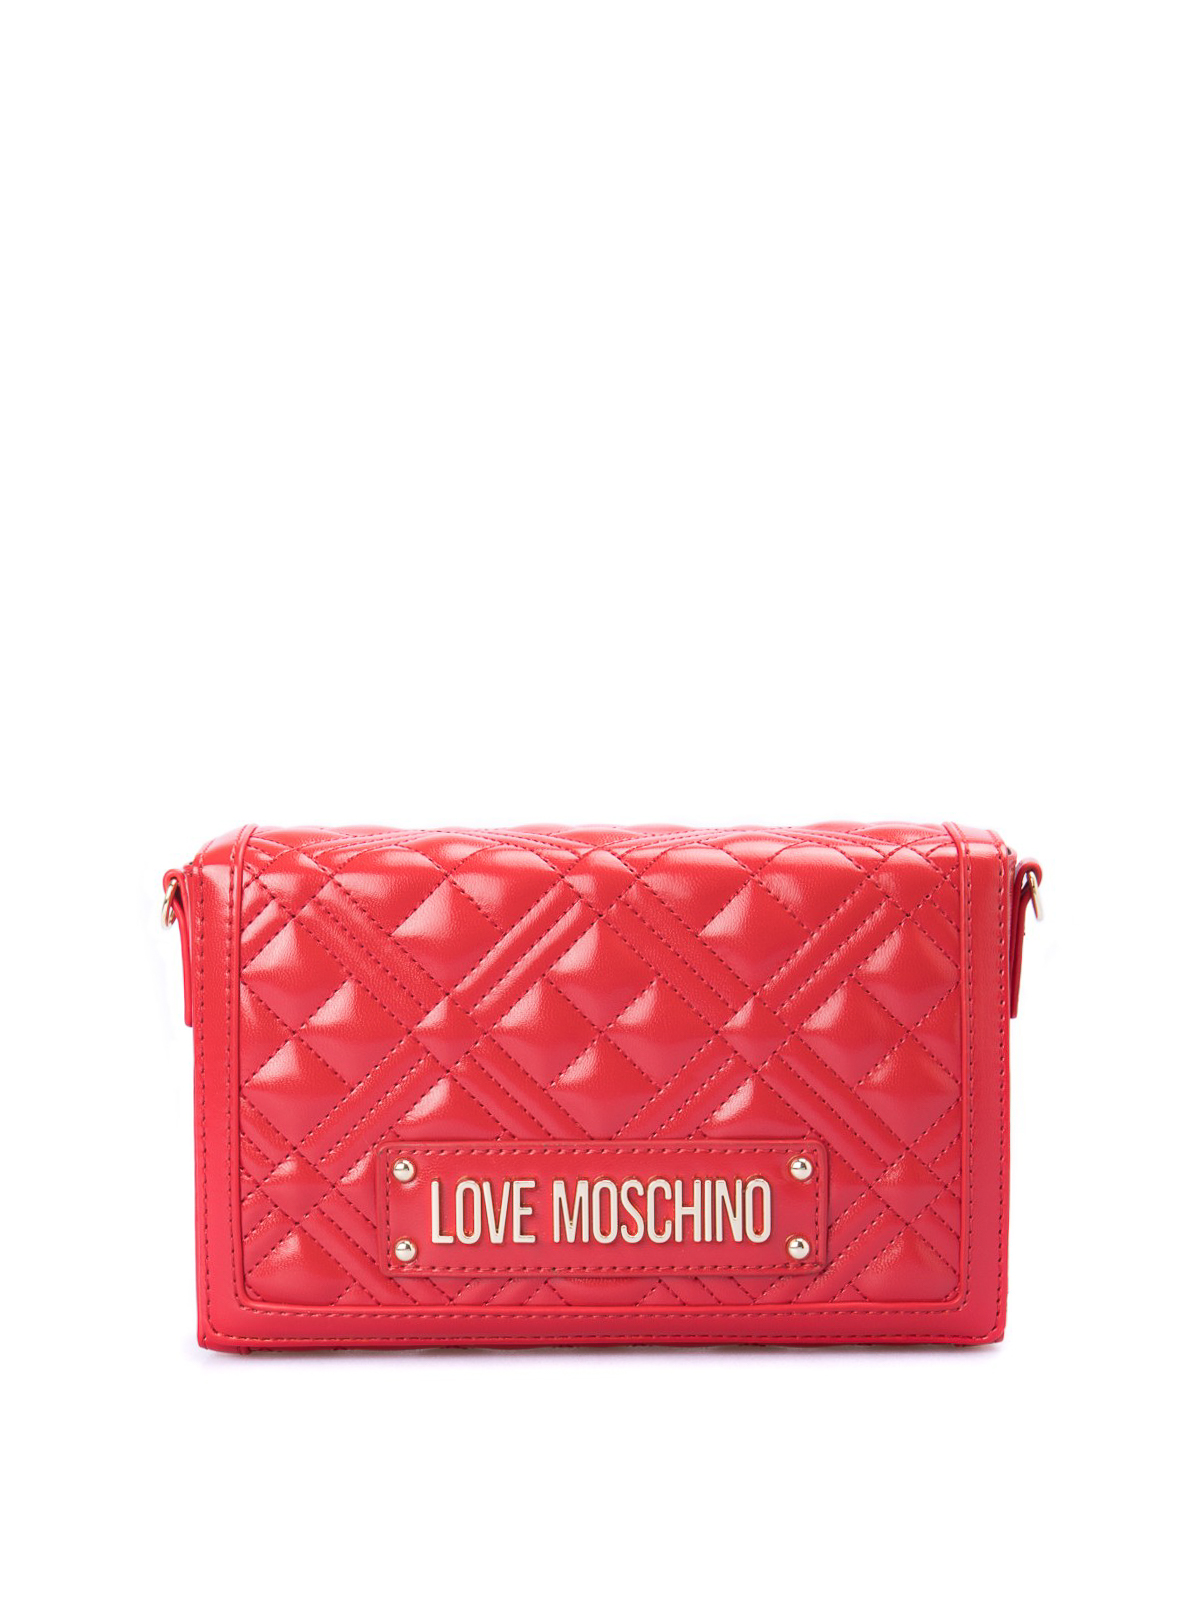 LOVE MOSCHINO FAUX LEATHER CROSS BODY BAG